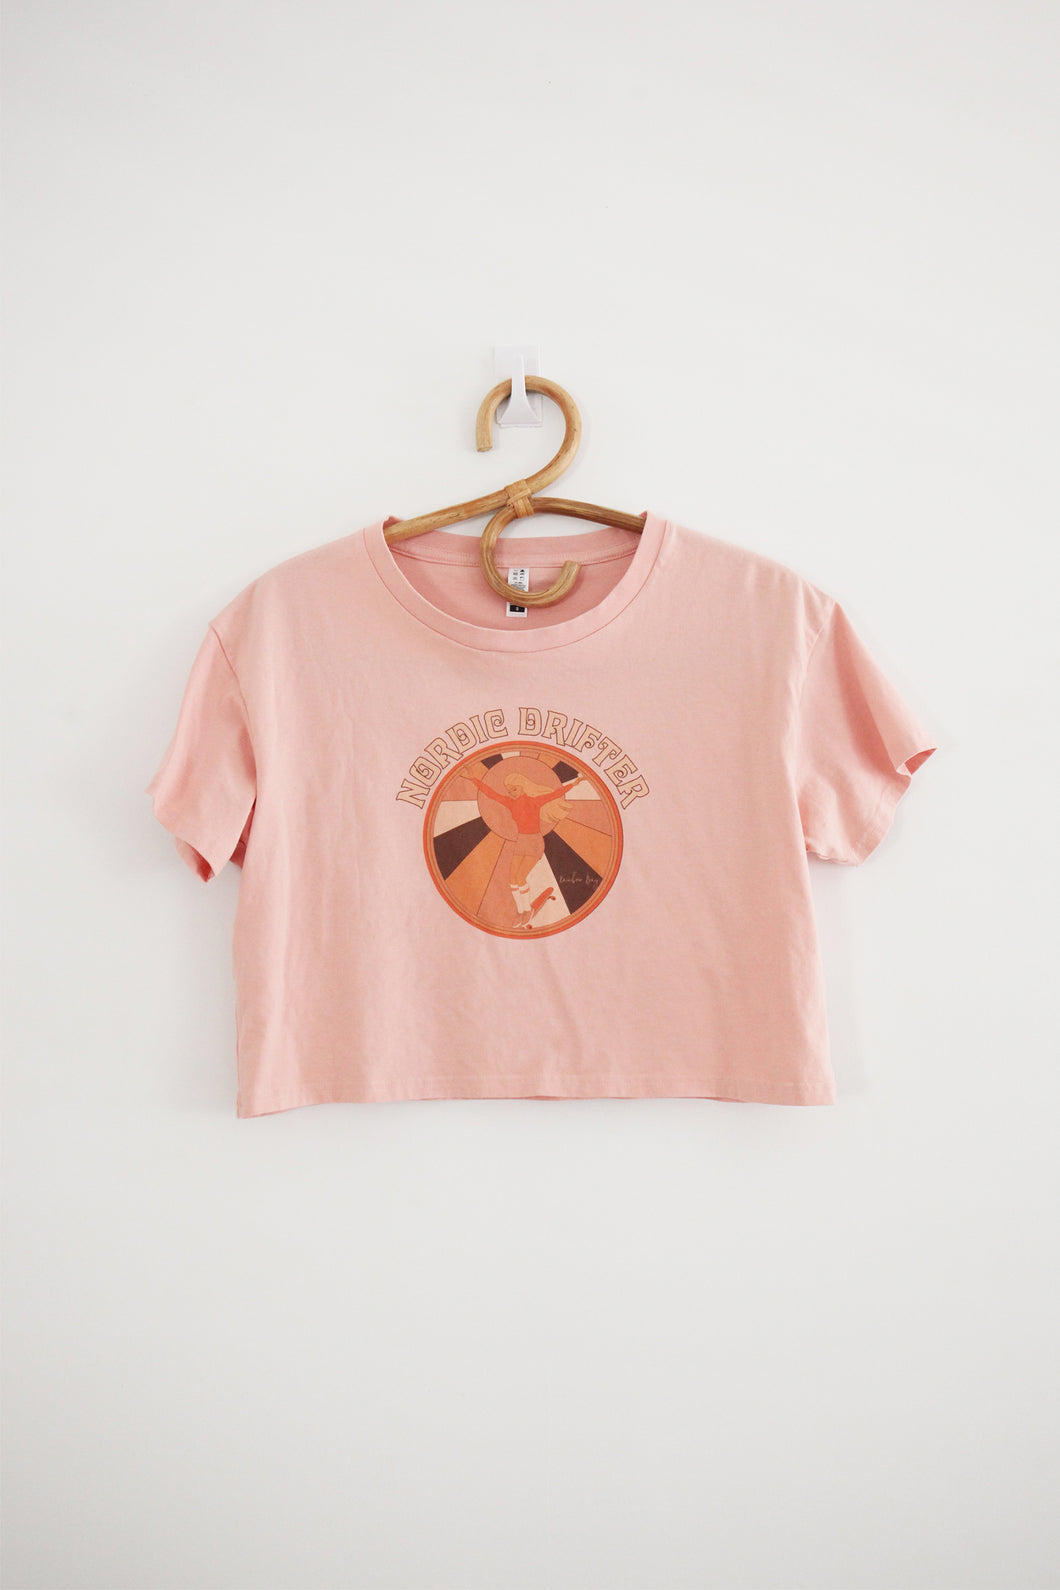 Nose Rider Tee - Dusty Pink